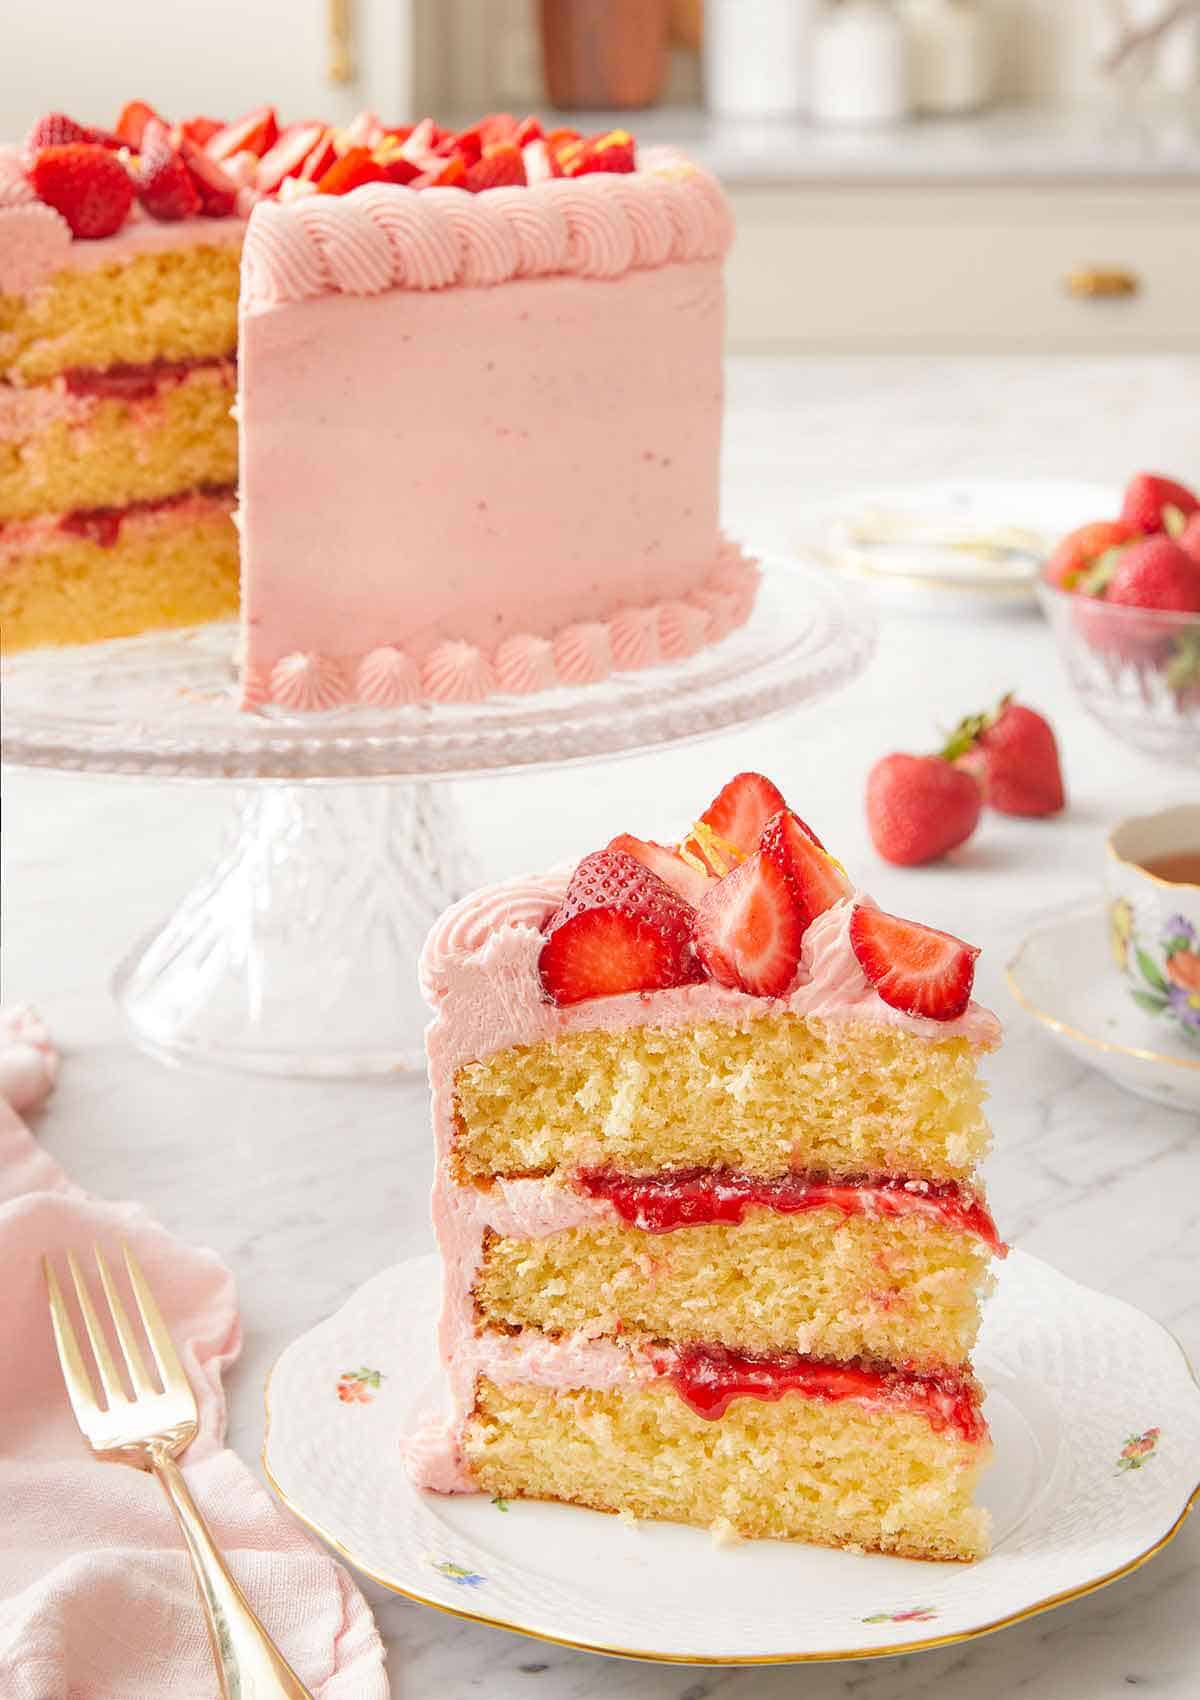 A slice of strawberry lemonade cake on a plate in front of the cut cake in the back on a cake stand.